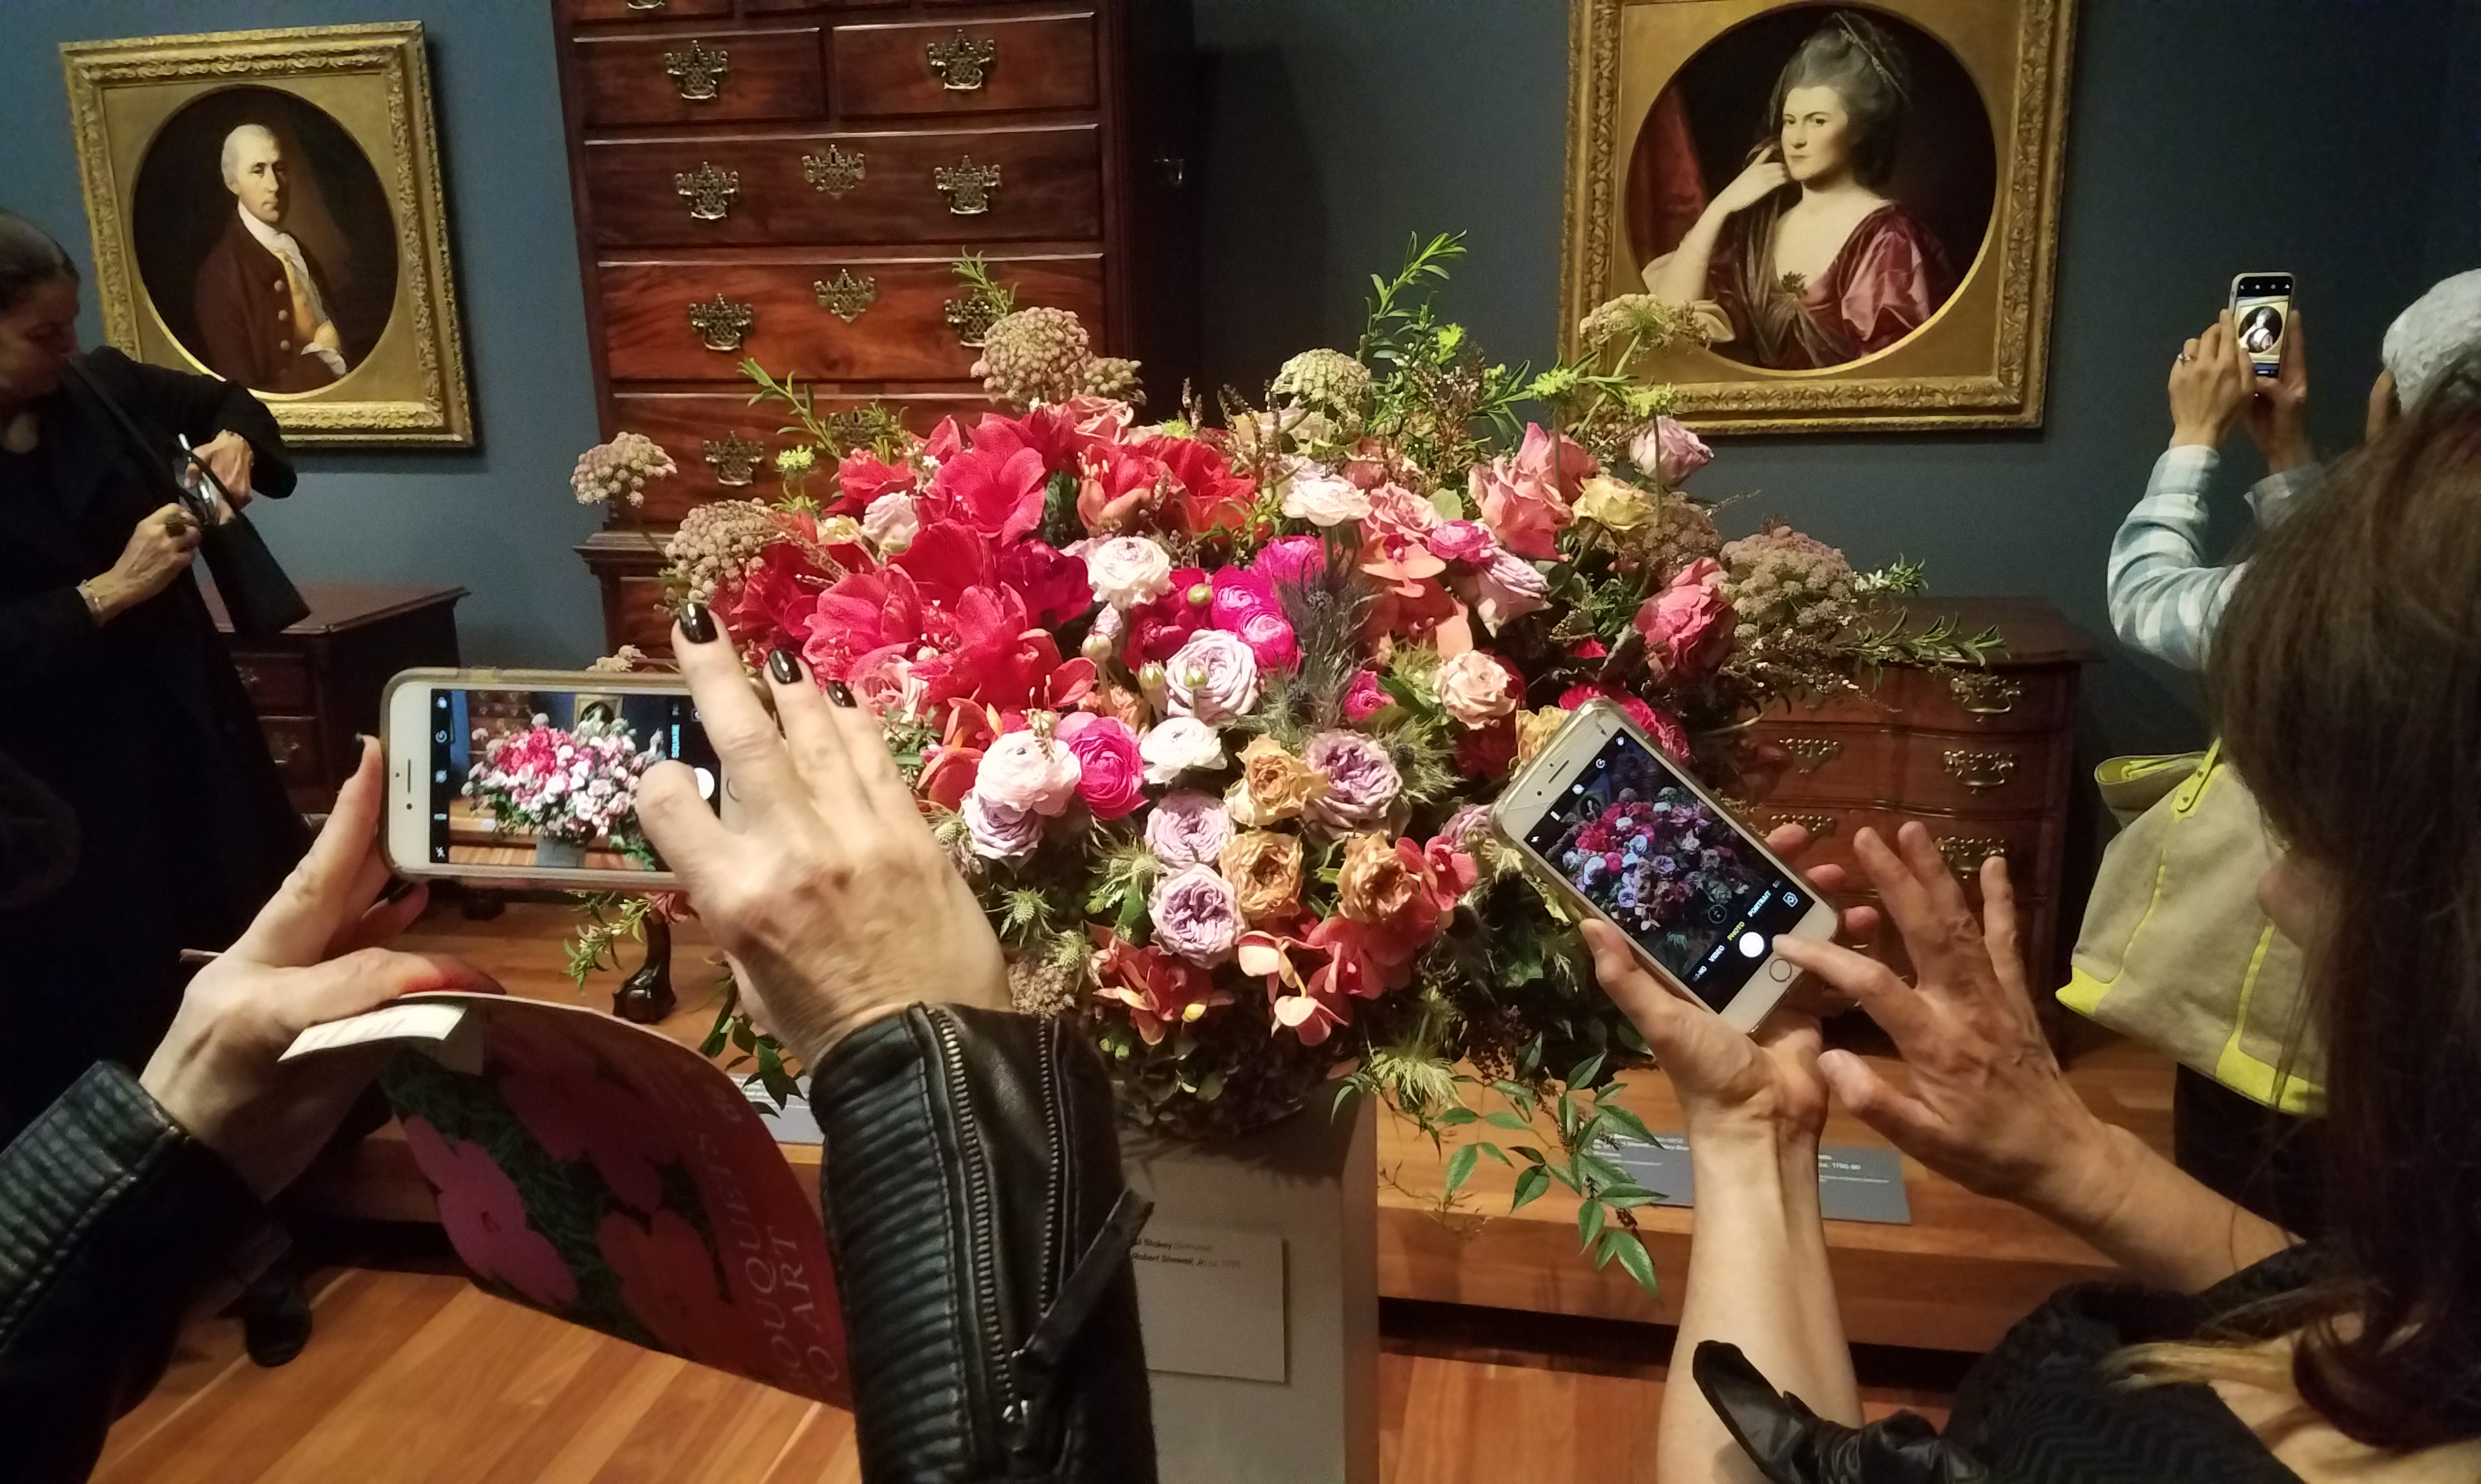 Museum goers take photos at the Bouquets to Art exhibit at the de Young Museum in San Francisco on Wednesday, March 14, 2018. (Katy Steinmetz for TIME)